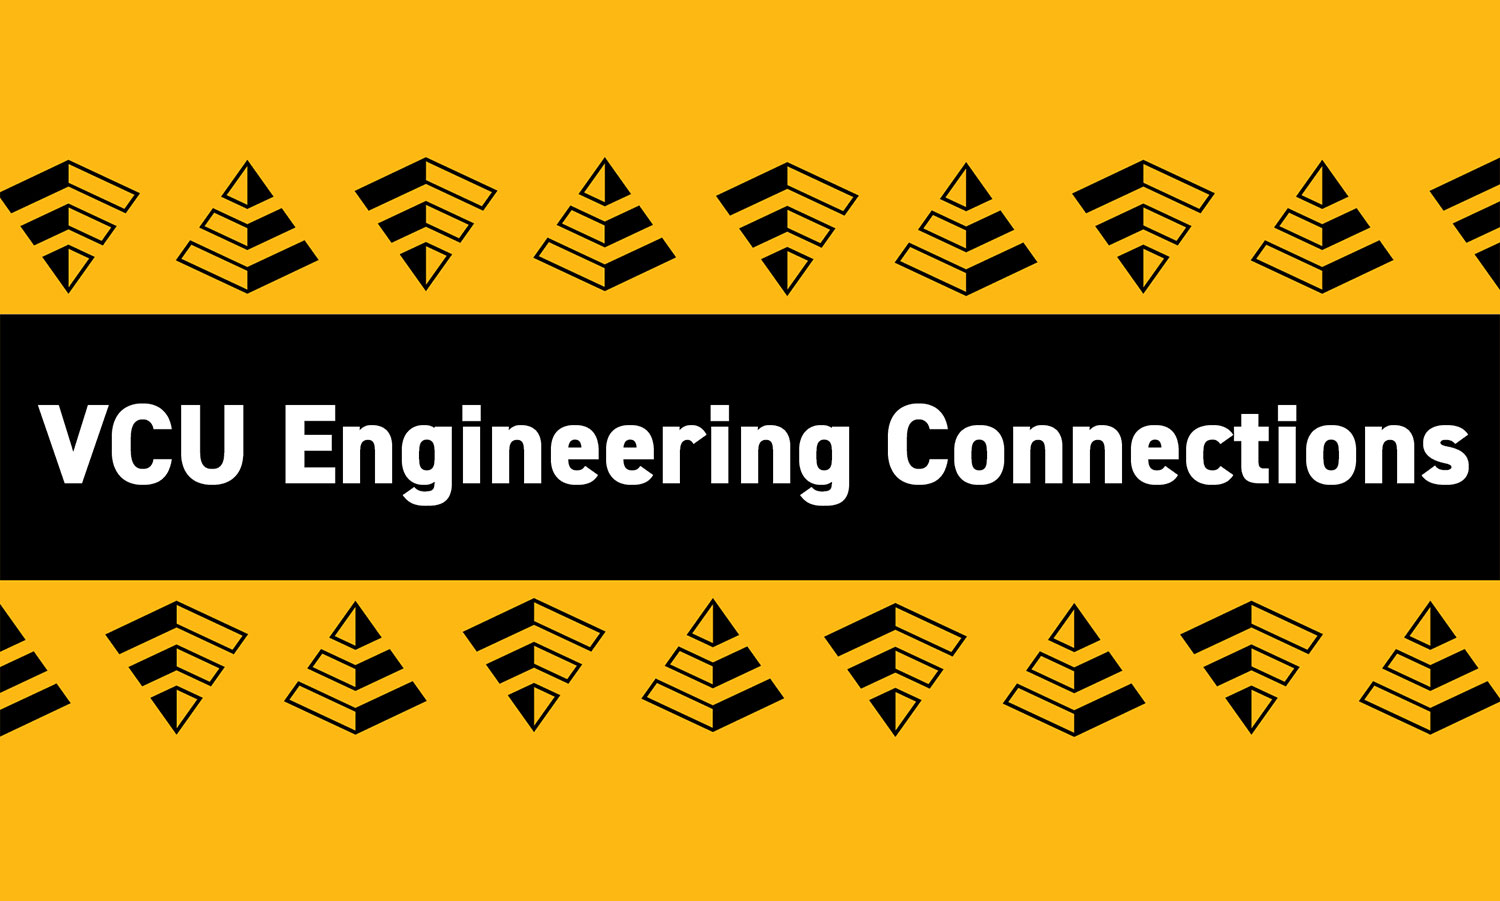 VCU Engineering Connections